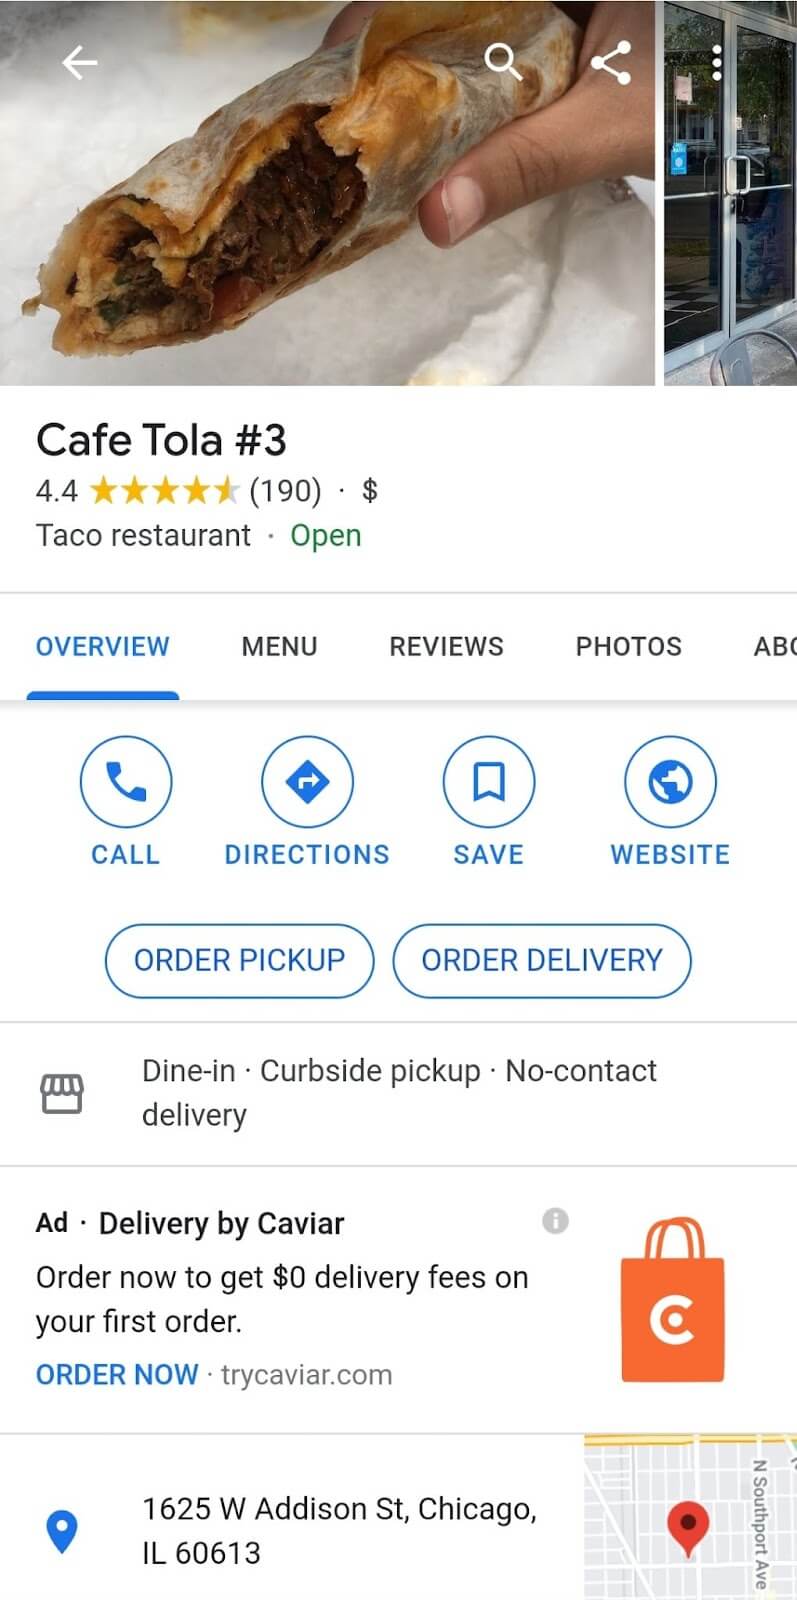 The Google My Business page for Cafe Tola, a restaurant in Chicago